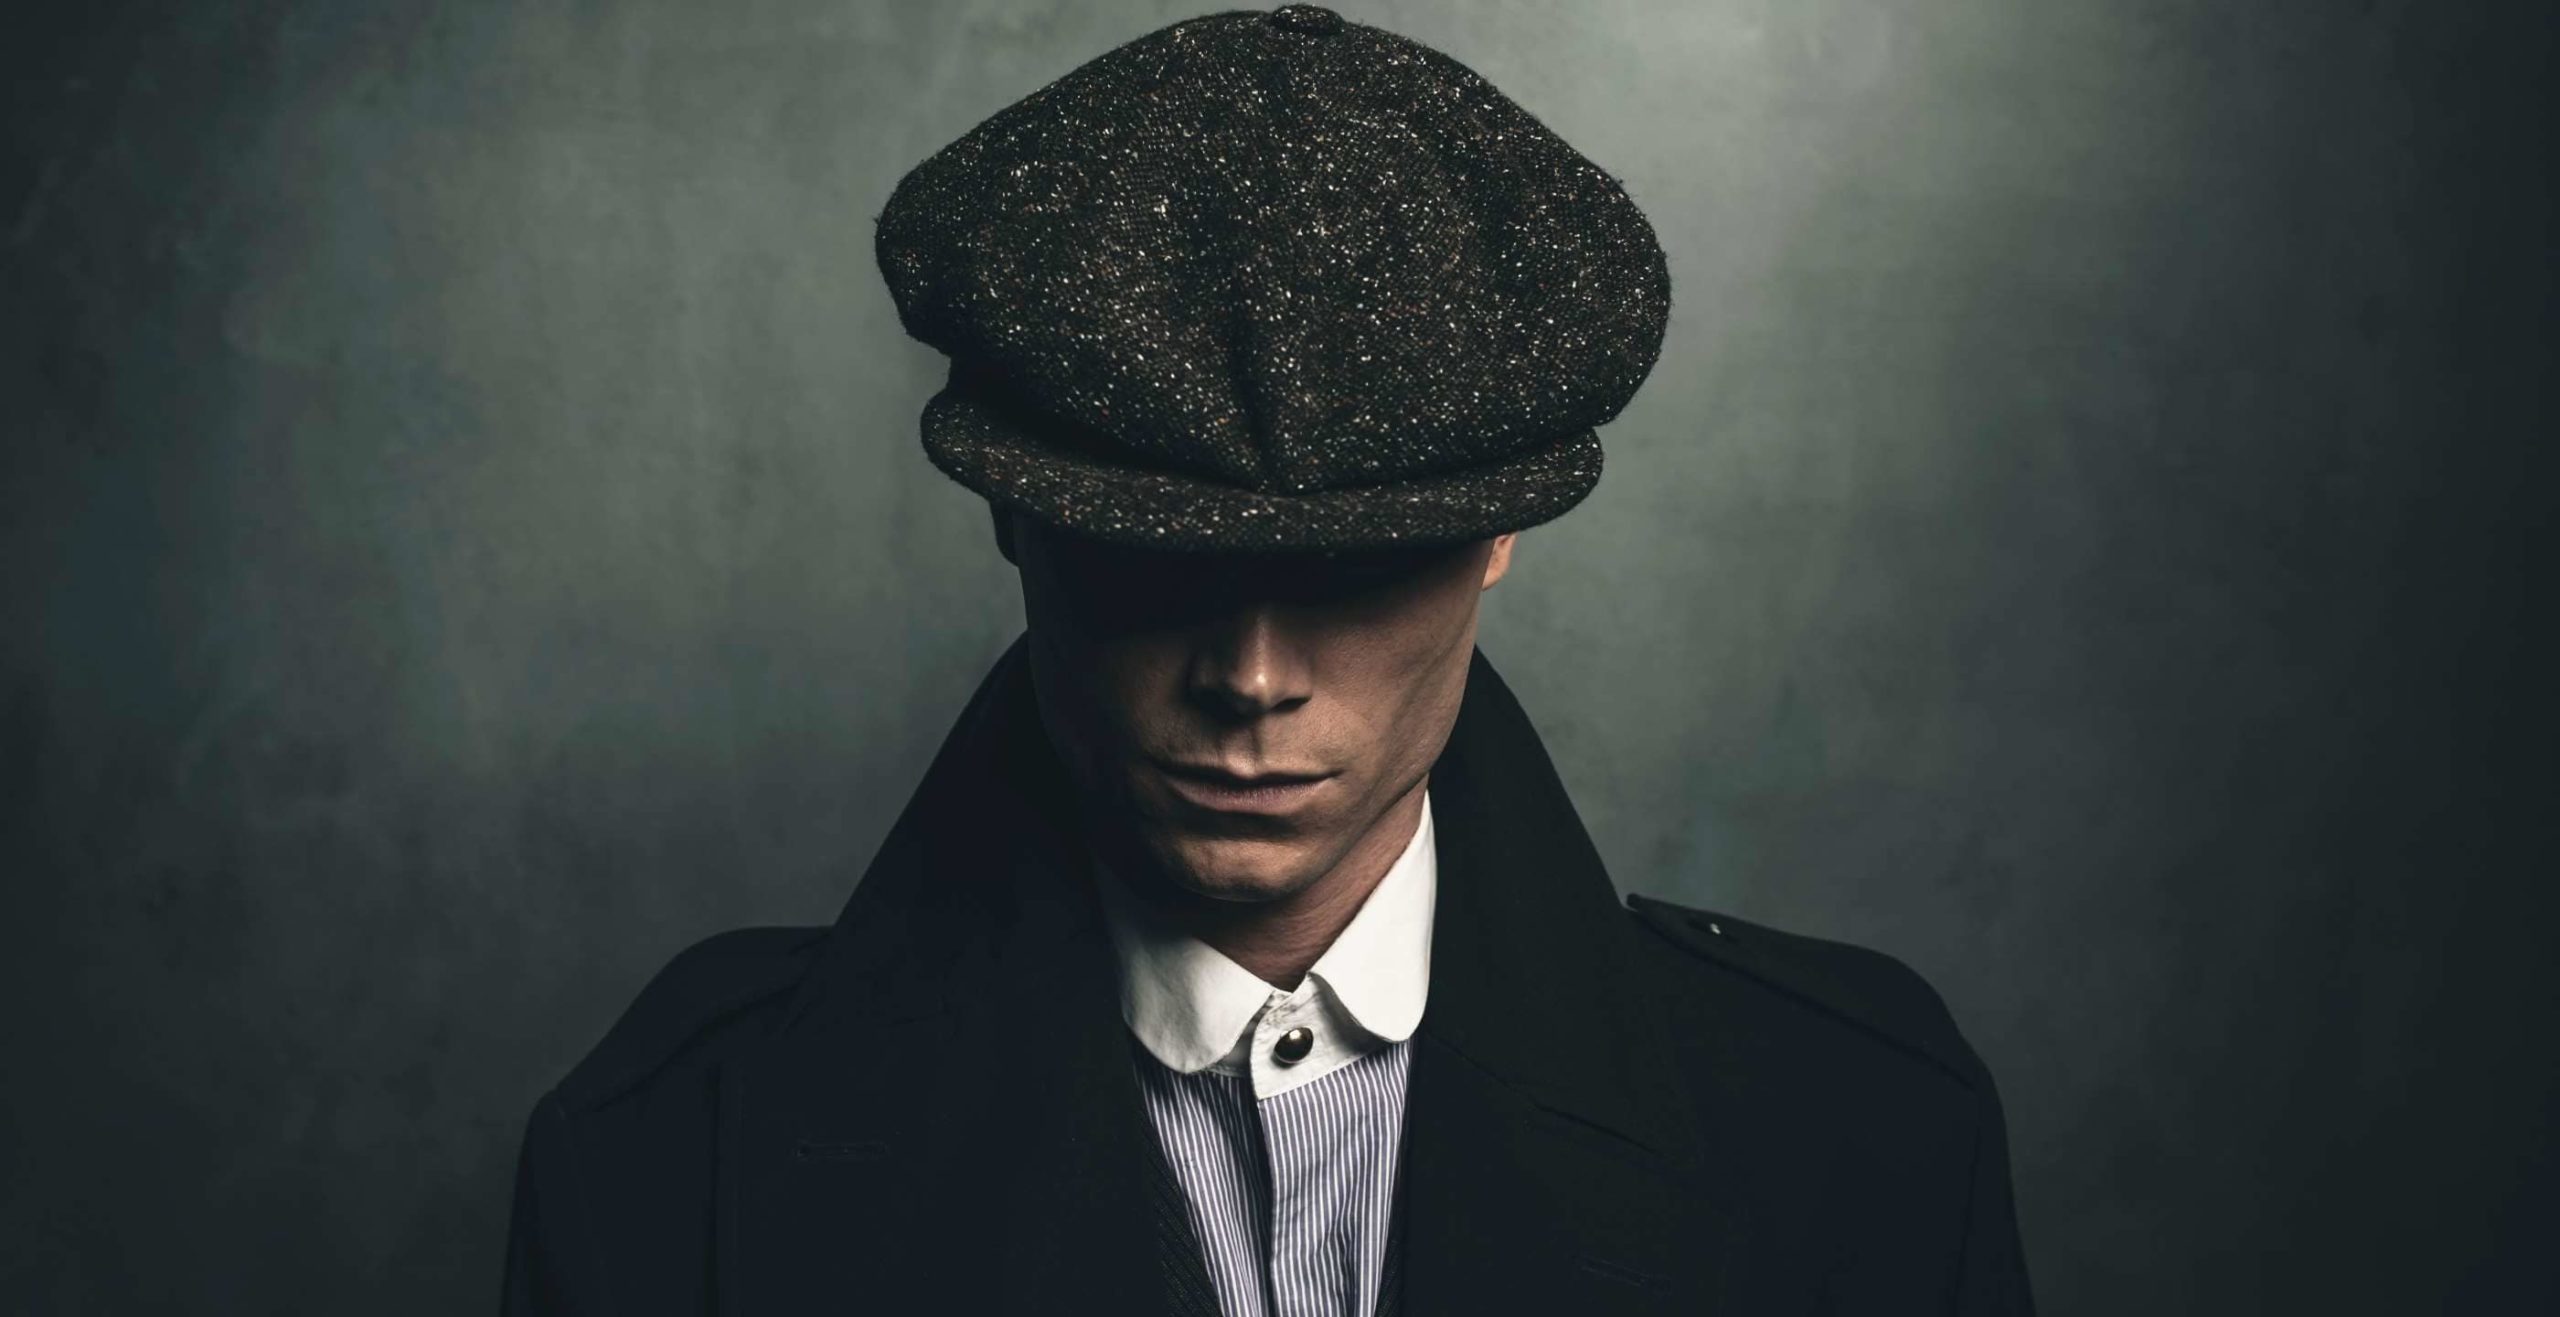 It’s A Wrap For Peaky Blinders Season 6: Release Date